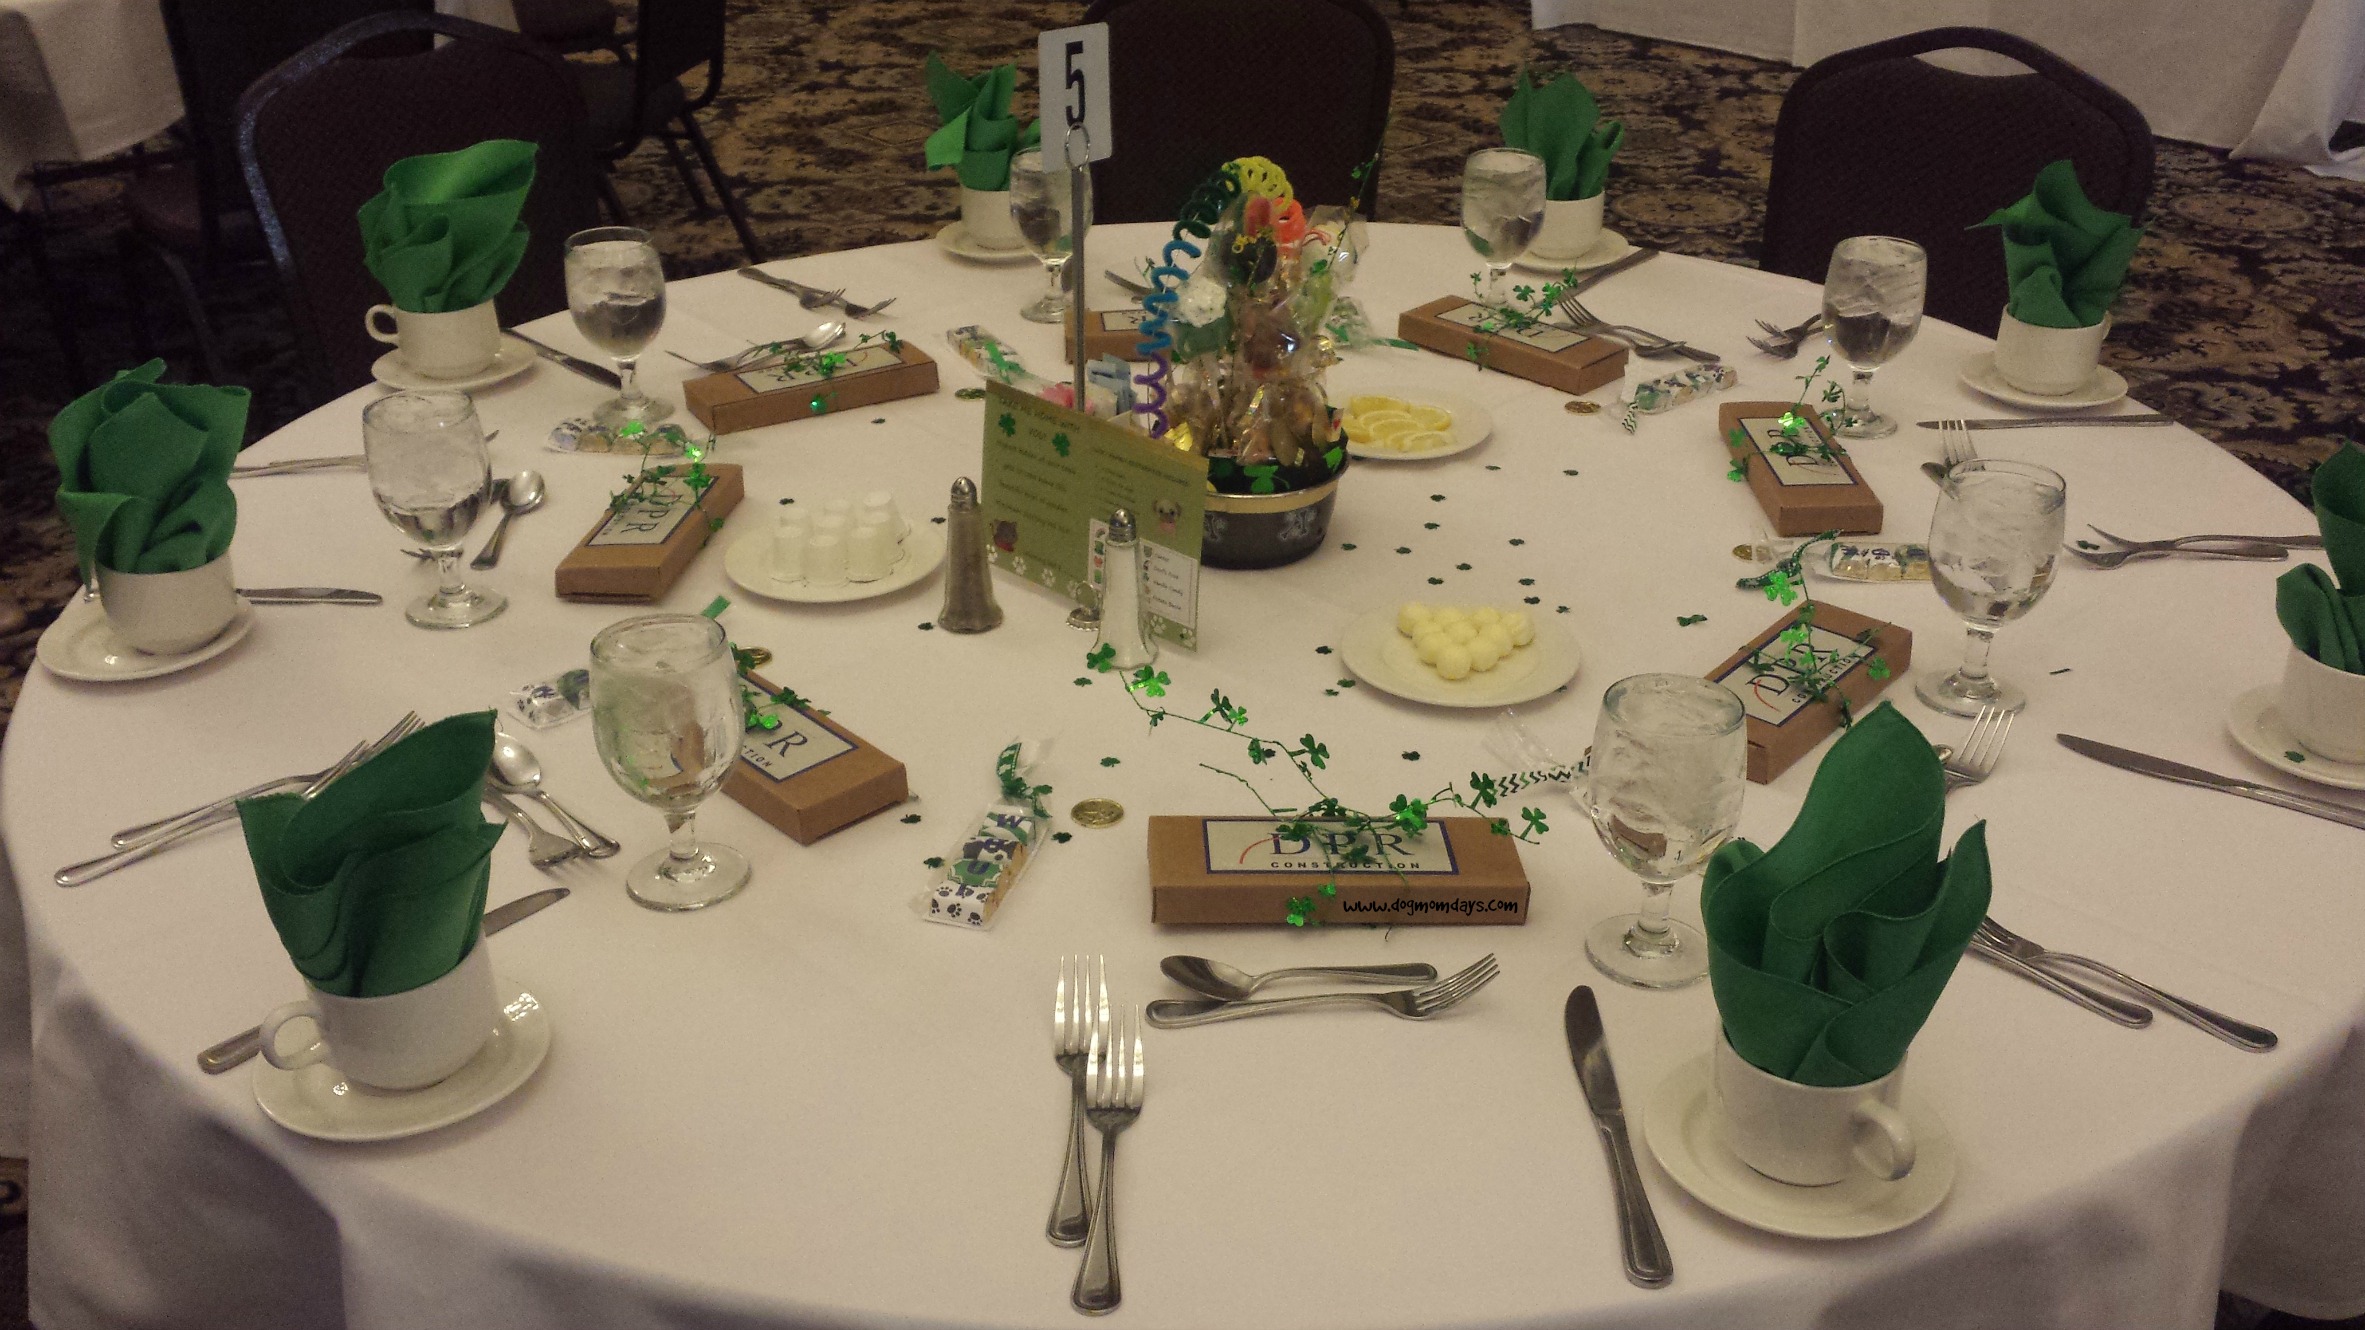 The beautiful table set up!